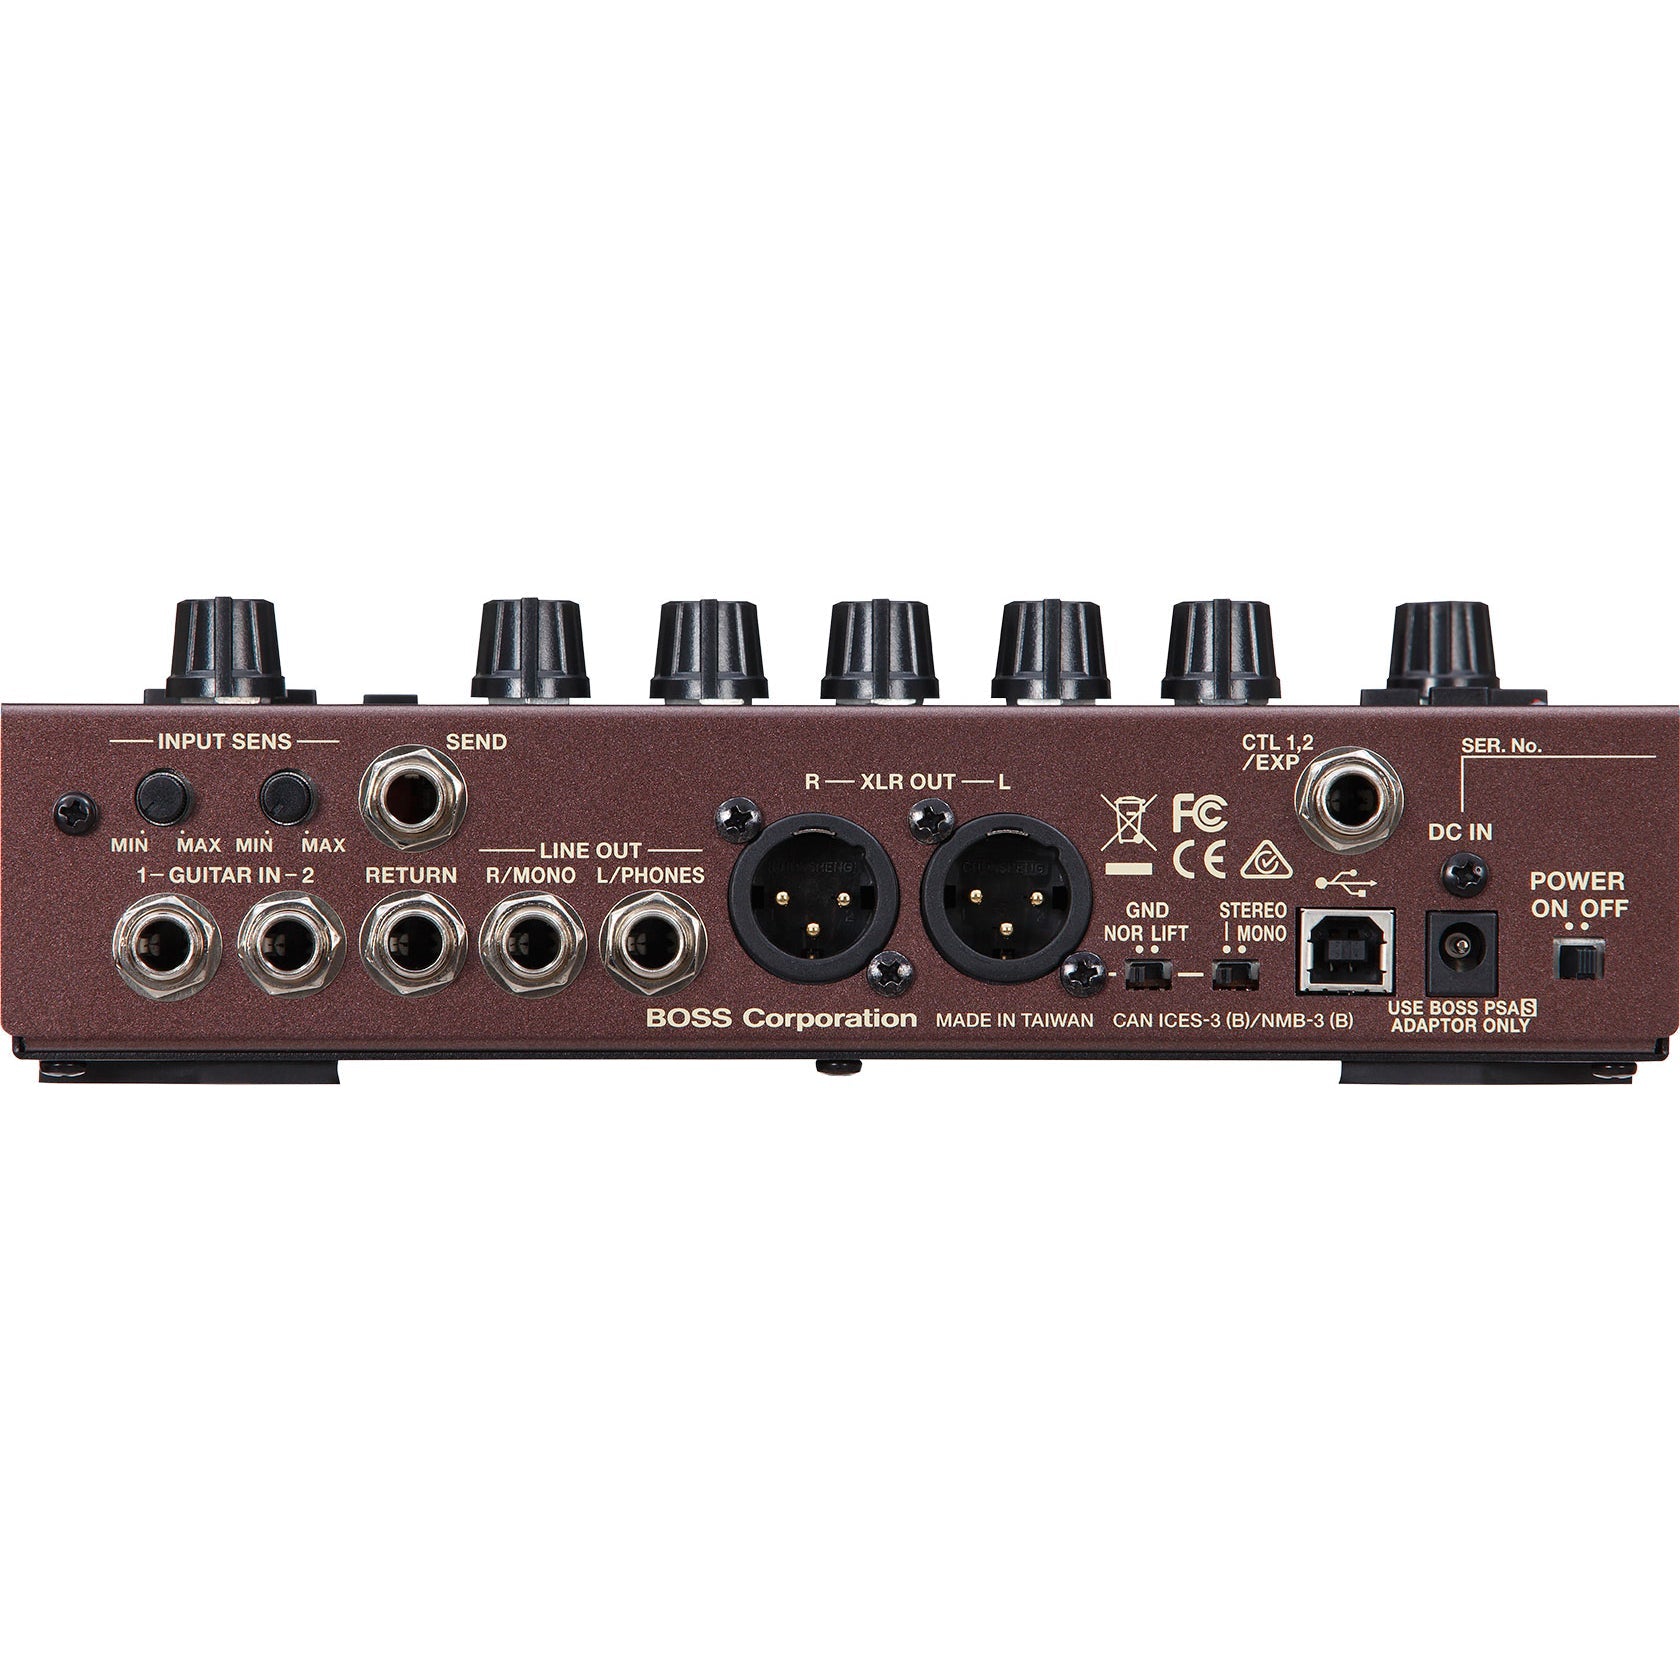 Pedal Guitar Boss AD-10 Acoustic Preamp - Việt Music